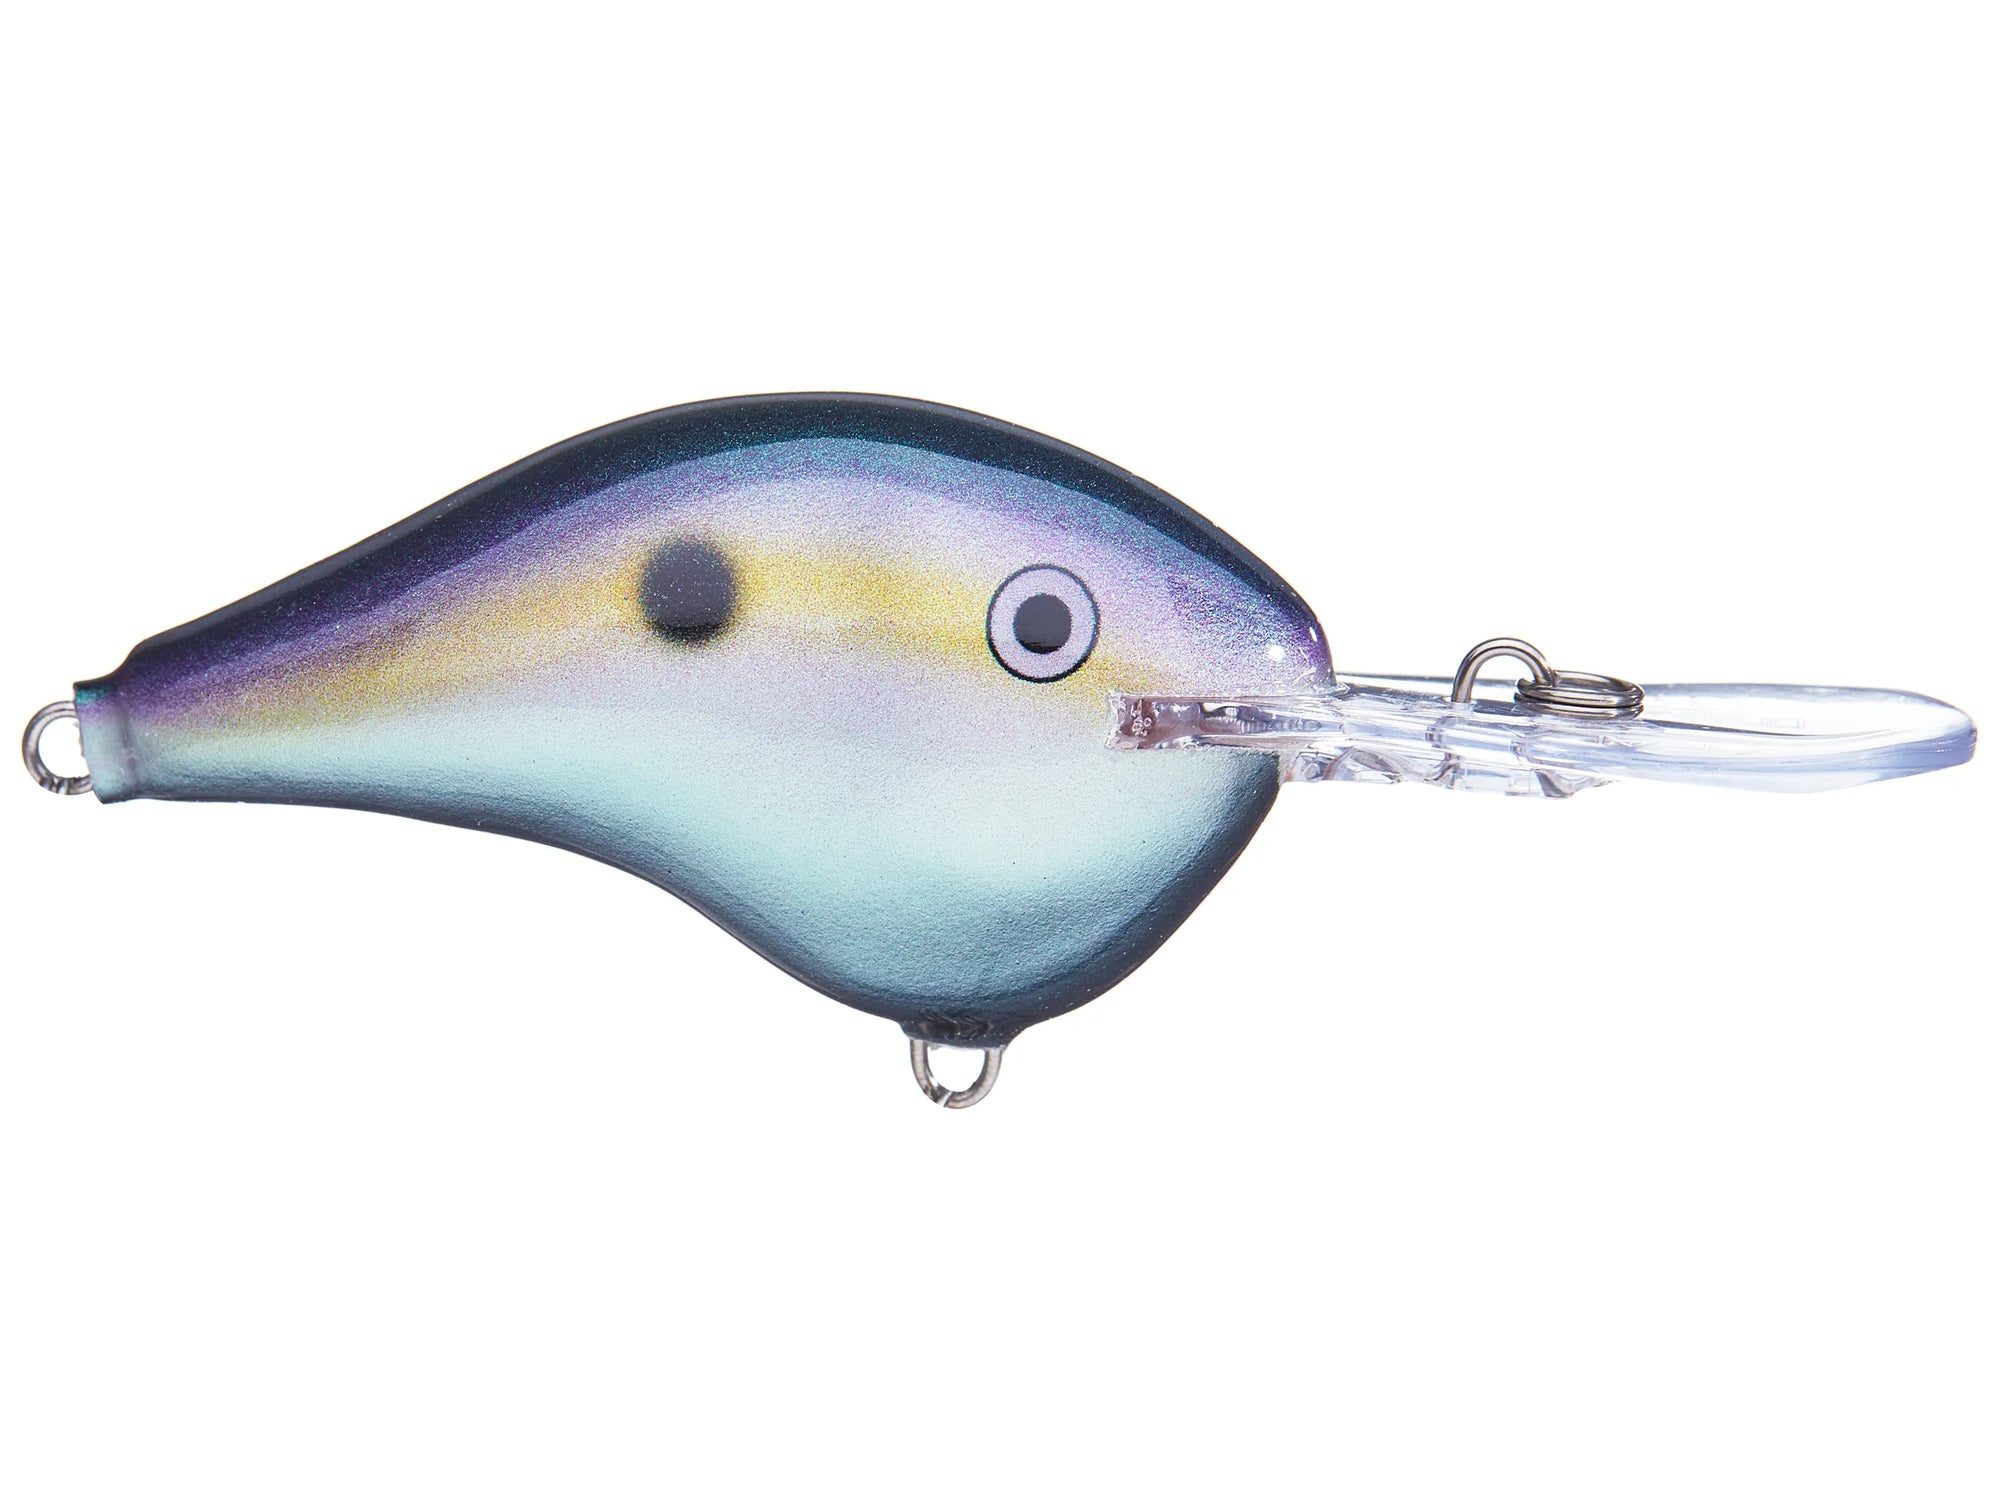 Rapala DT 08 Live River Shad